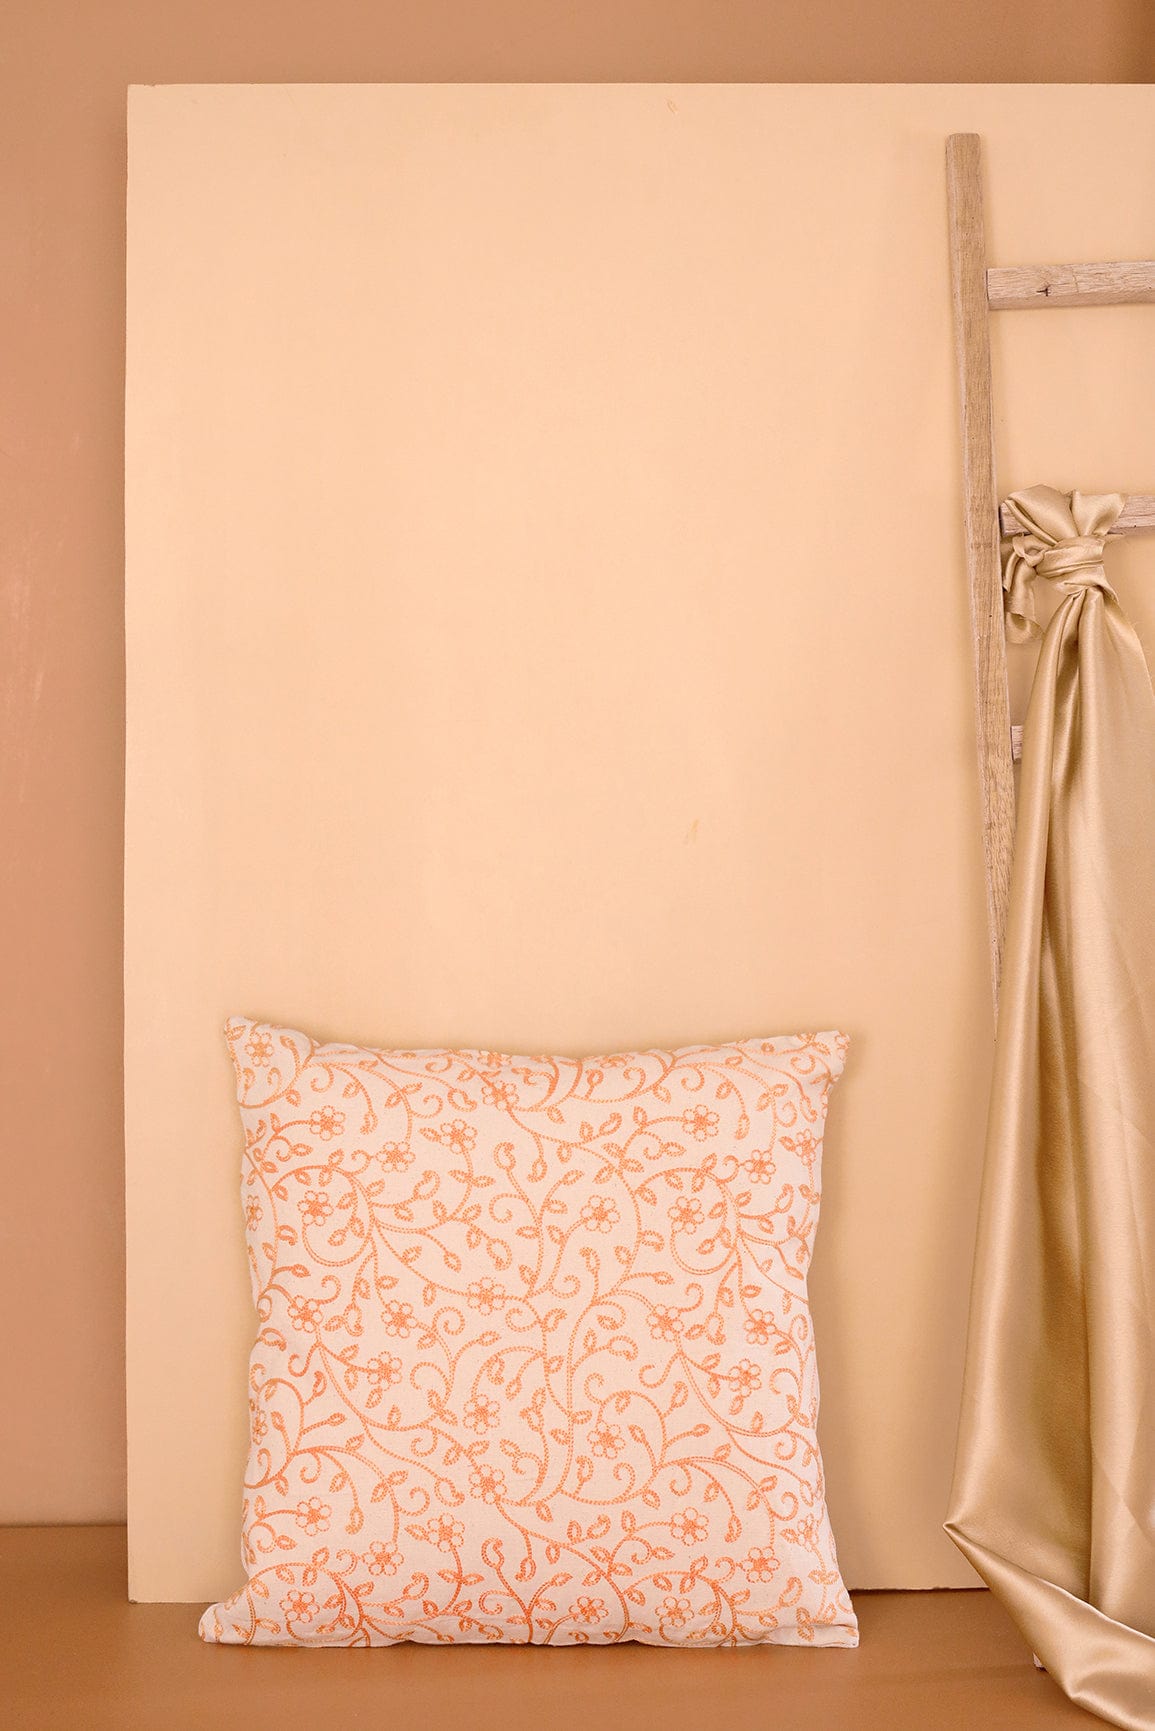 doeraa Peach Colour Floral Embroidery on Off White cotton Cushion Cover (16*16 inches)